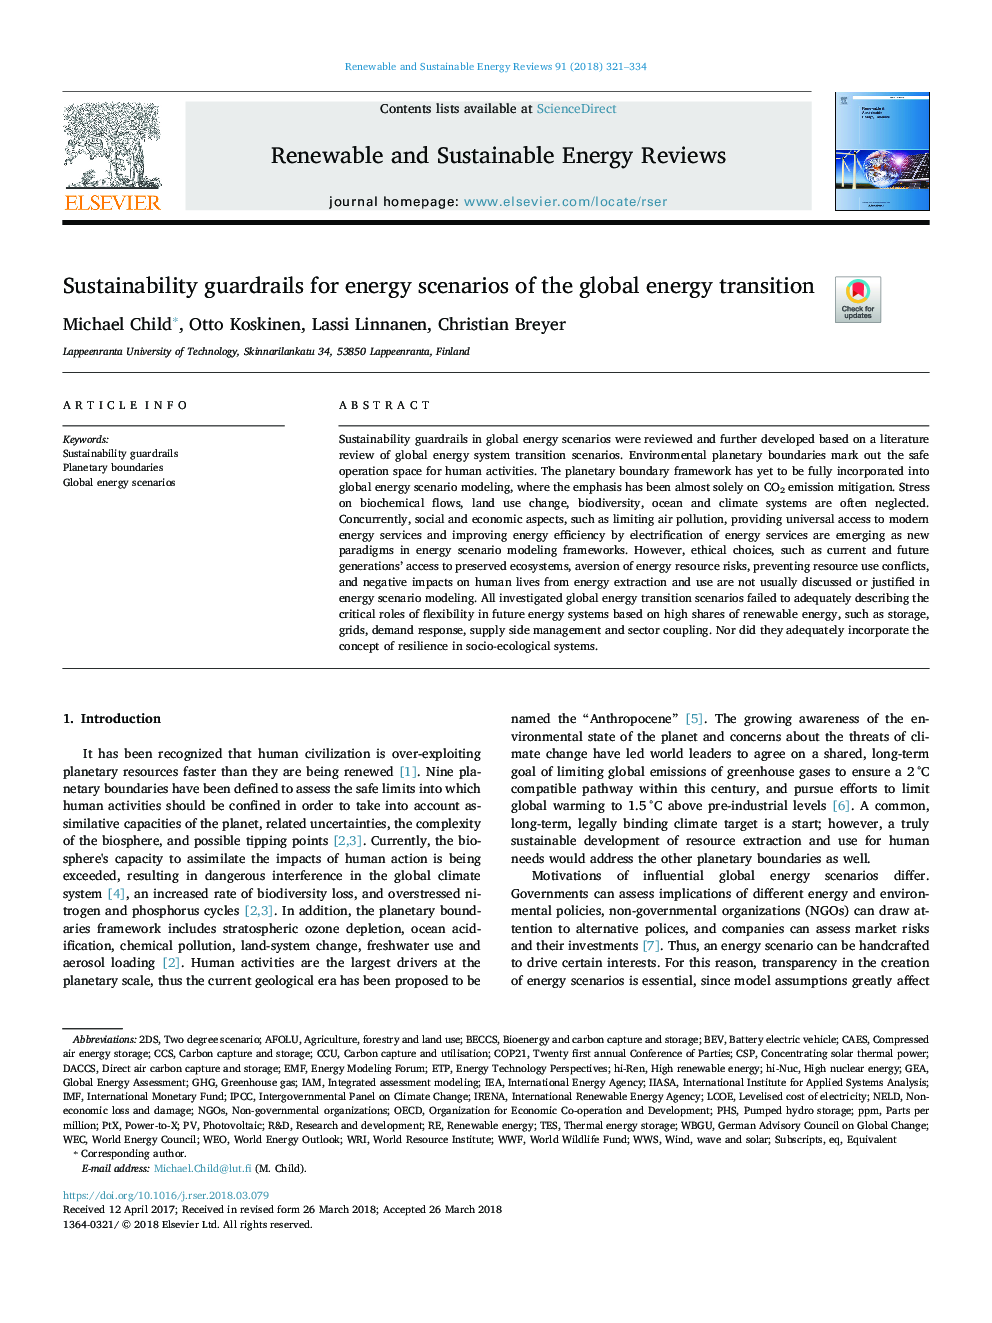 Sustainability guardrails for energy scenarios of the global energy transition